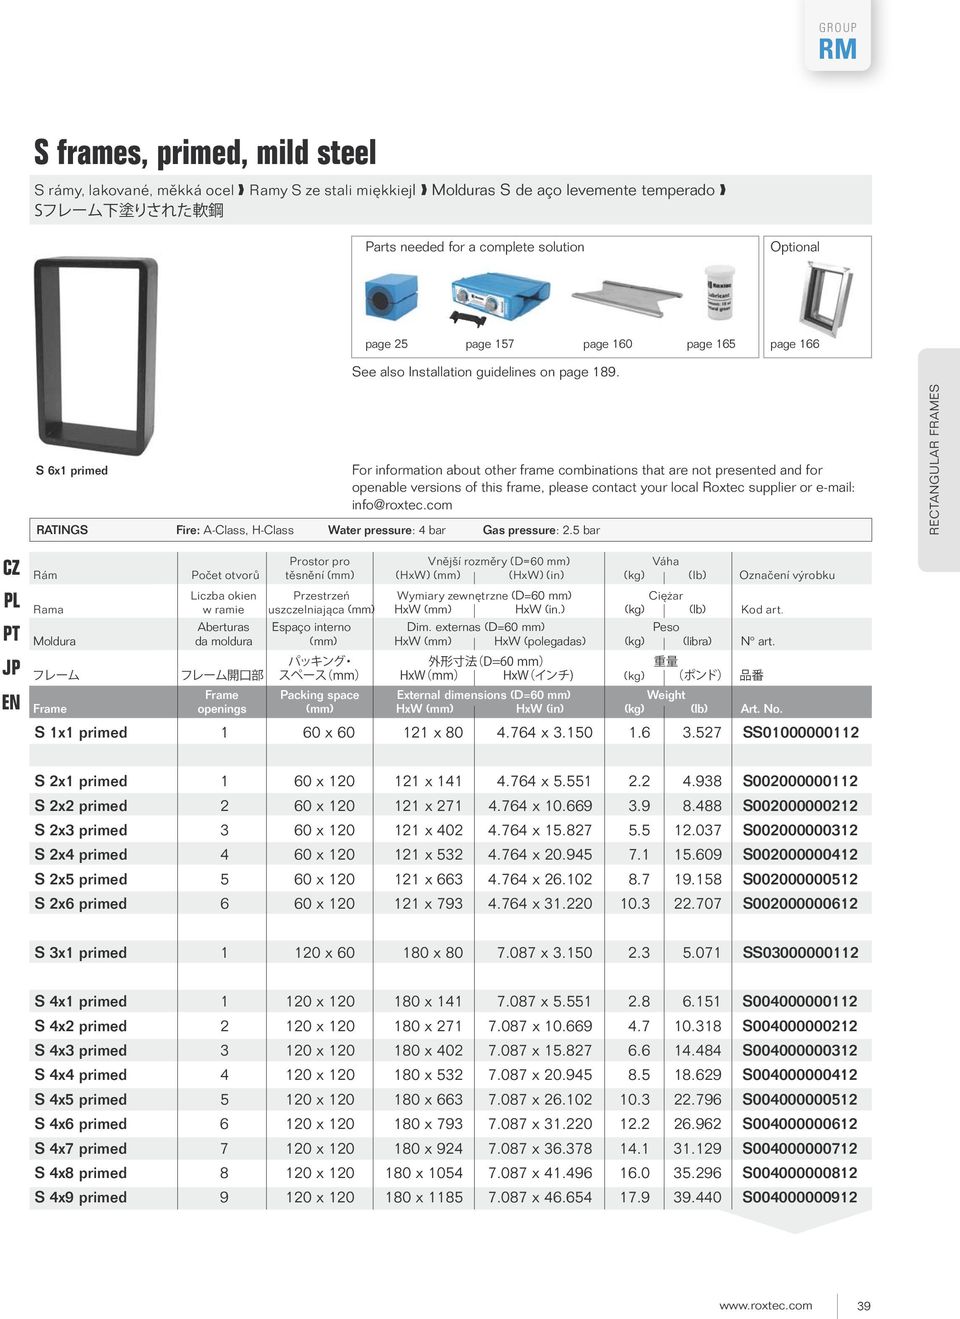 5 bar For information about other frame combinations that are not presented and for openable versions of this frame, please contact your local Roxtec supplier or e-mail: info@roxtec.